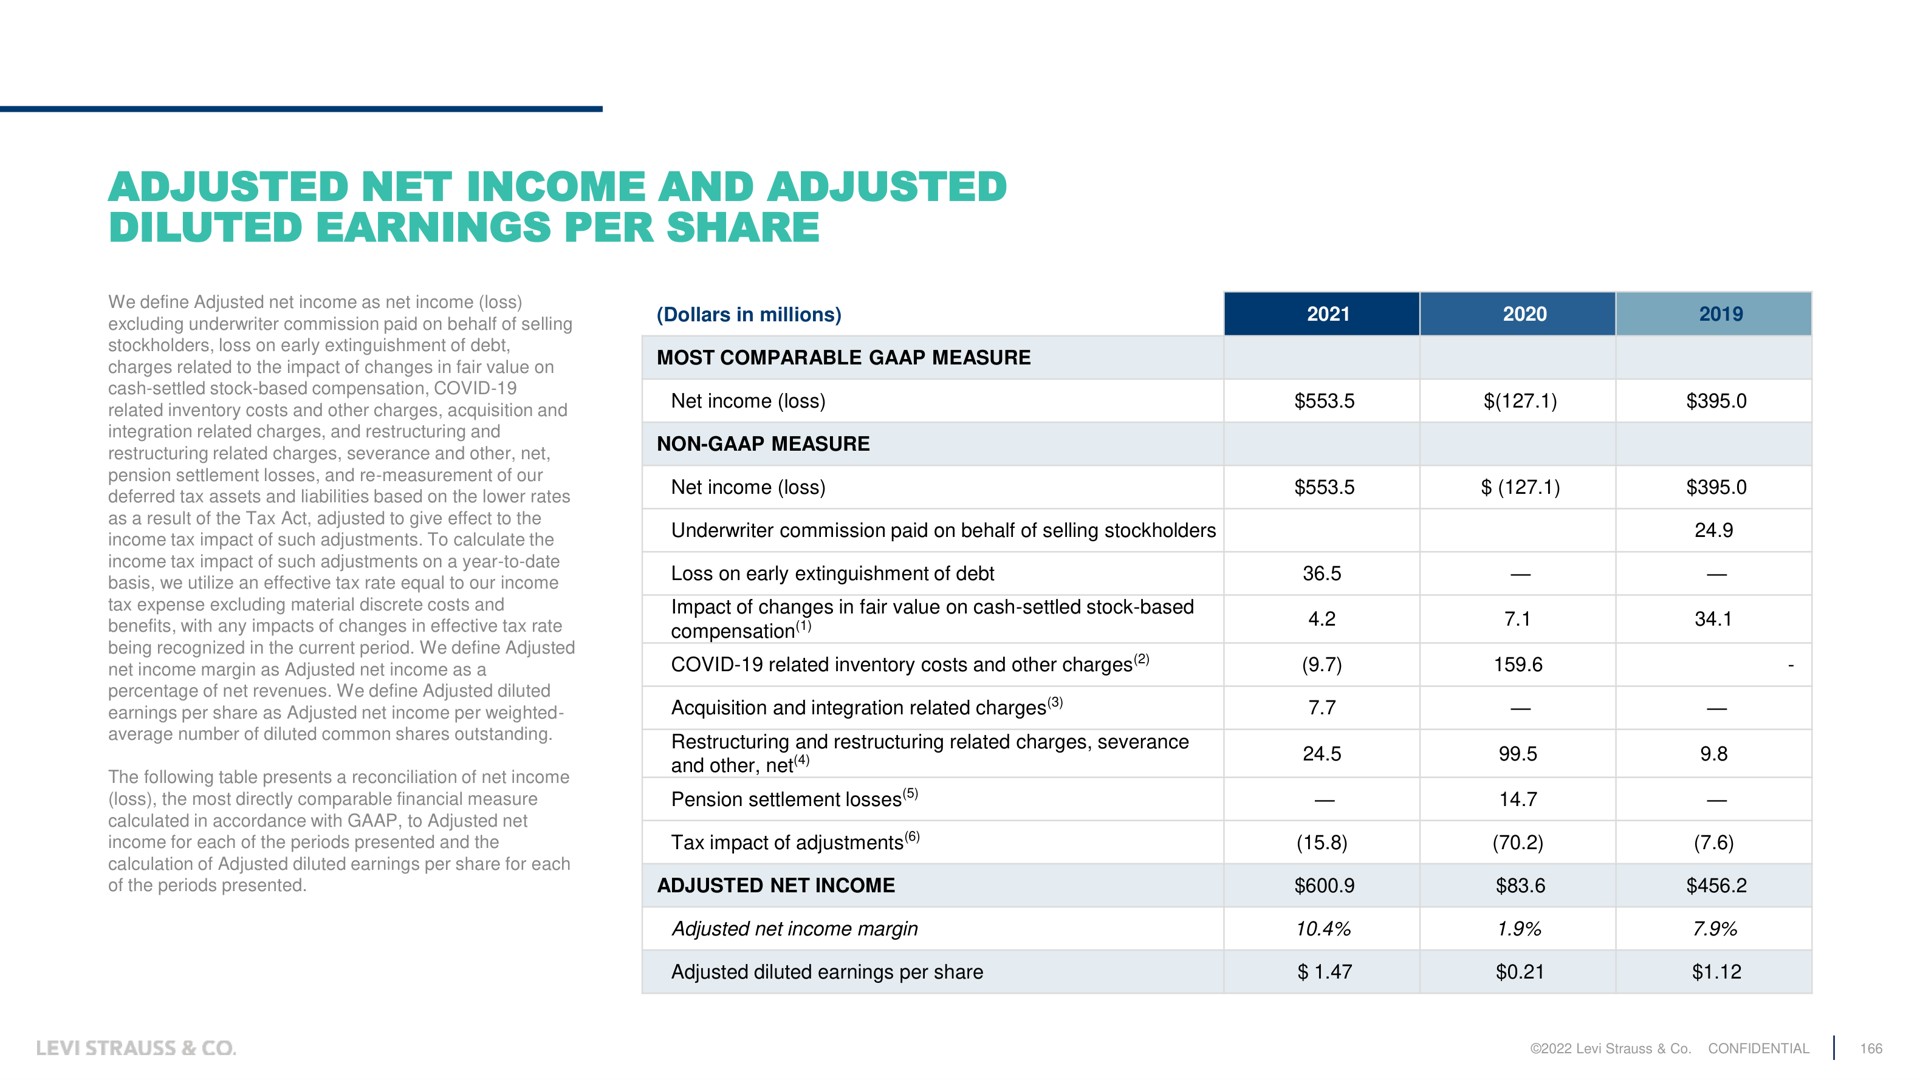 adjusted net income and adjusted diluted earnings per share | Levi Strauss